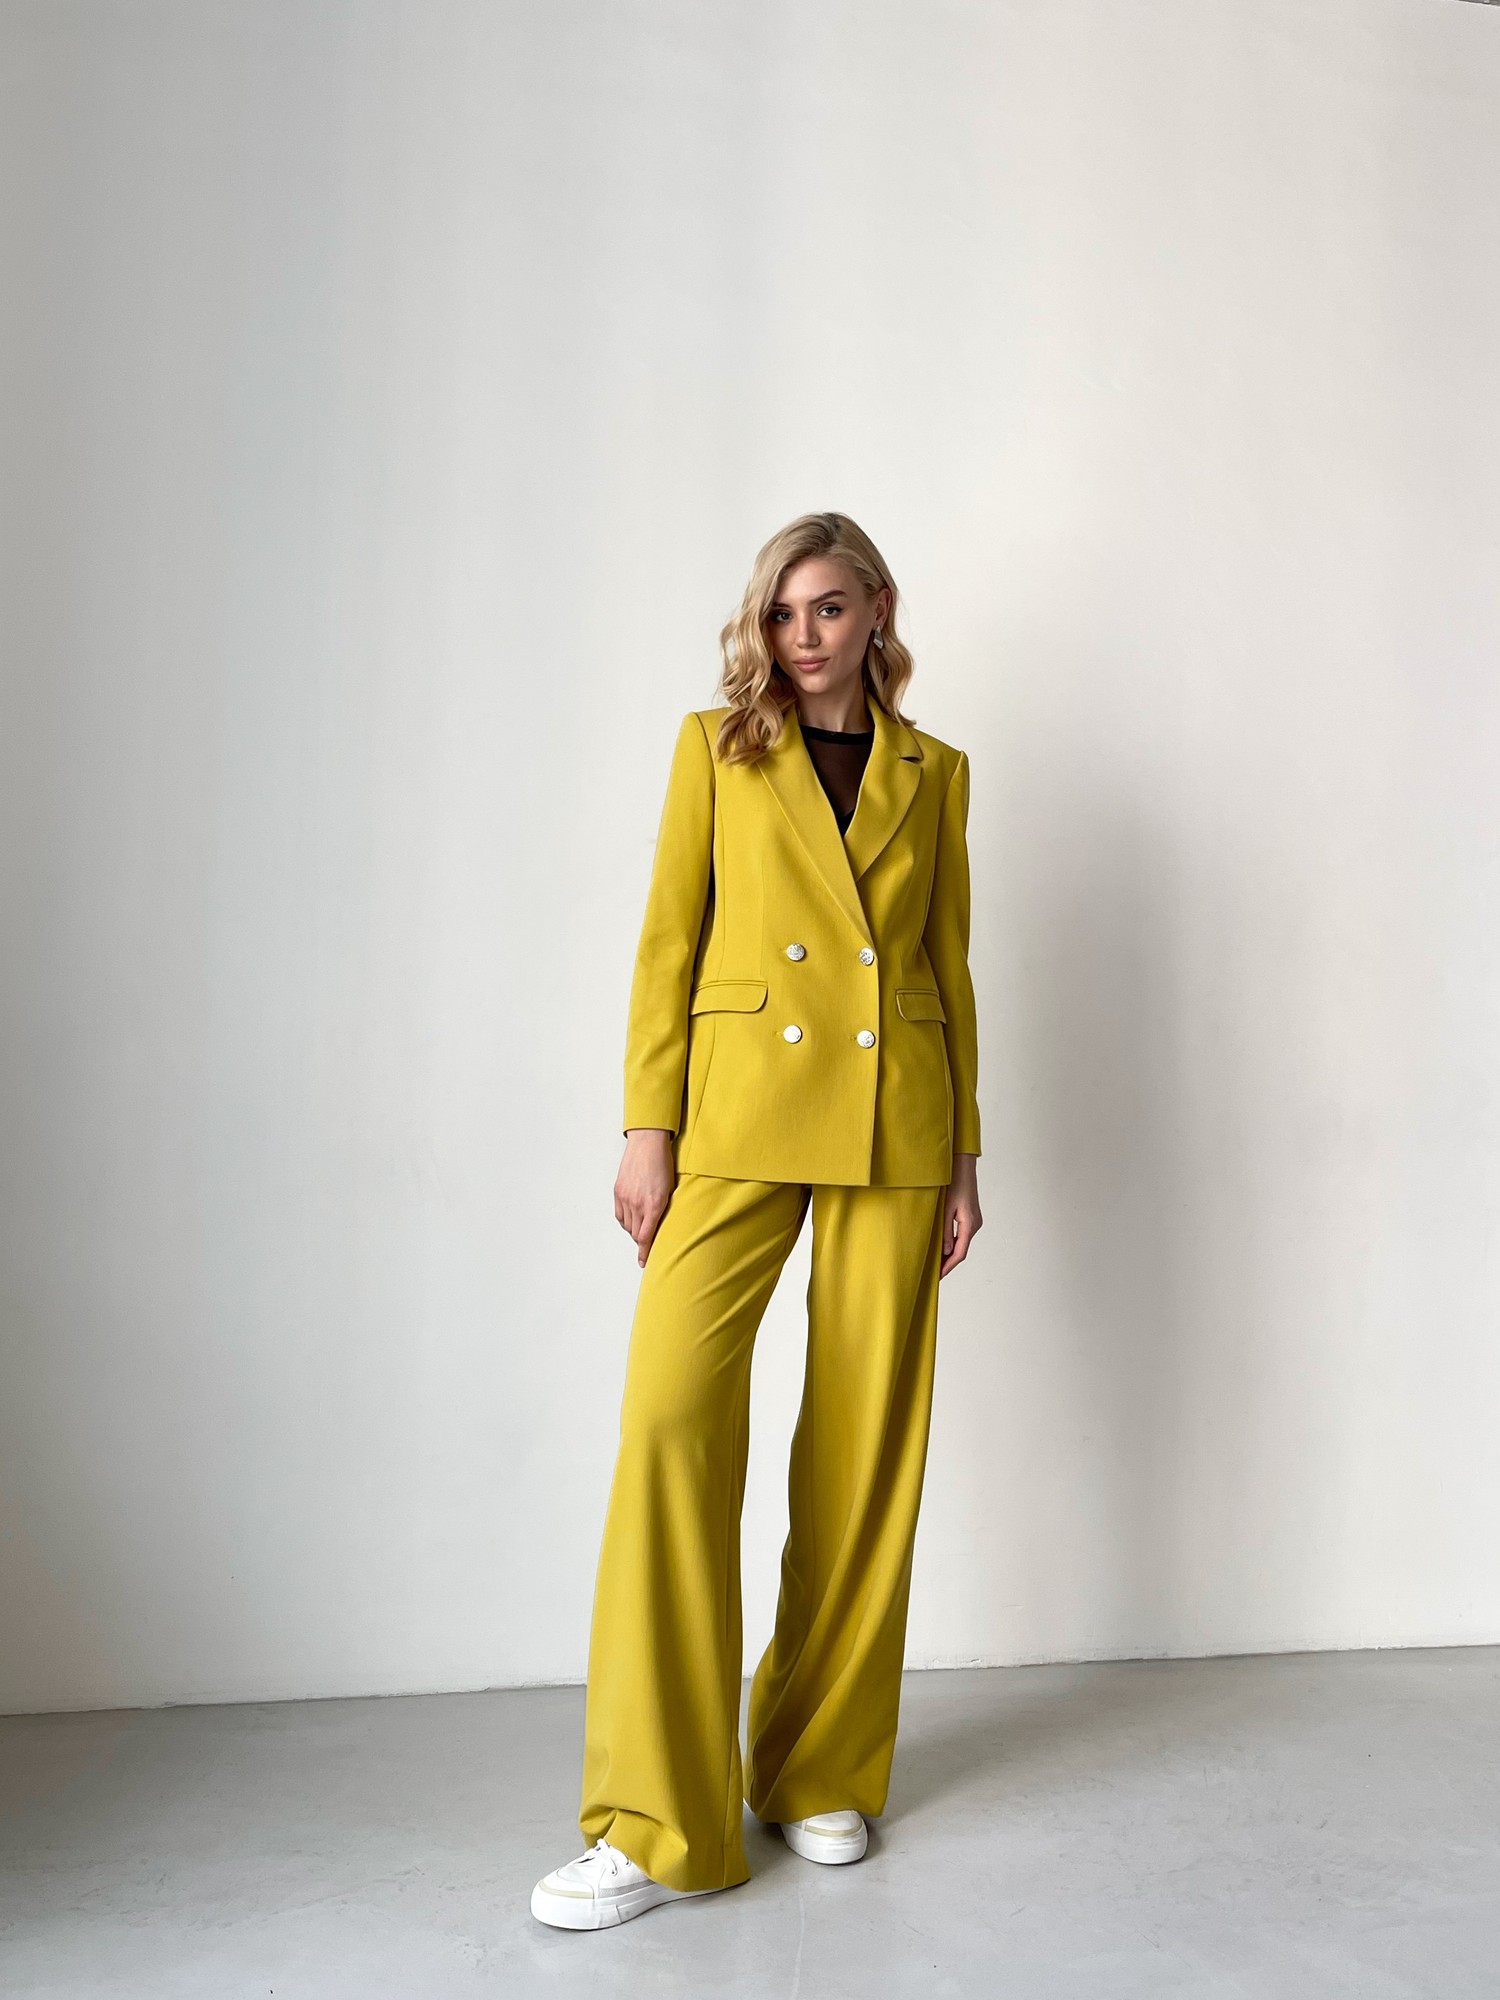 Suit jacket loose fit and maxi palazzo pants yellow